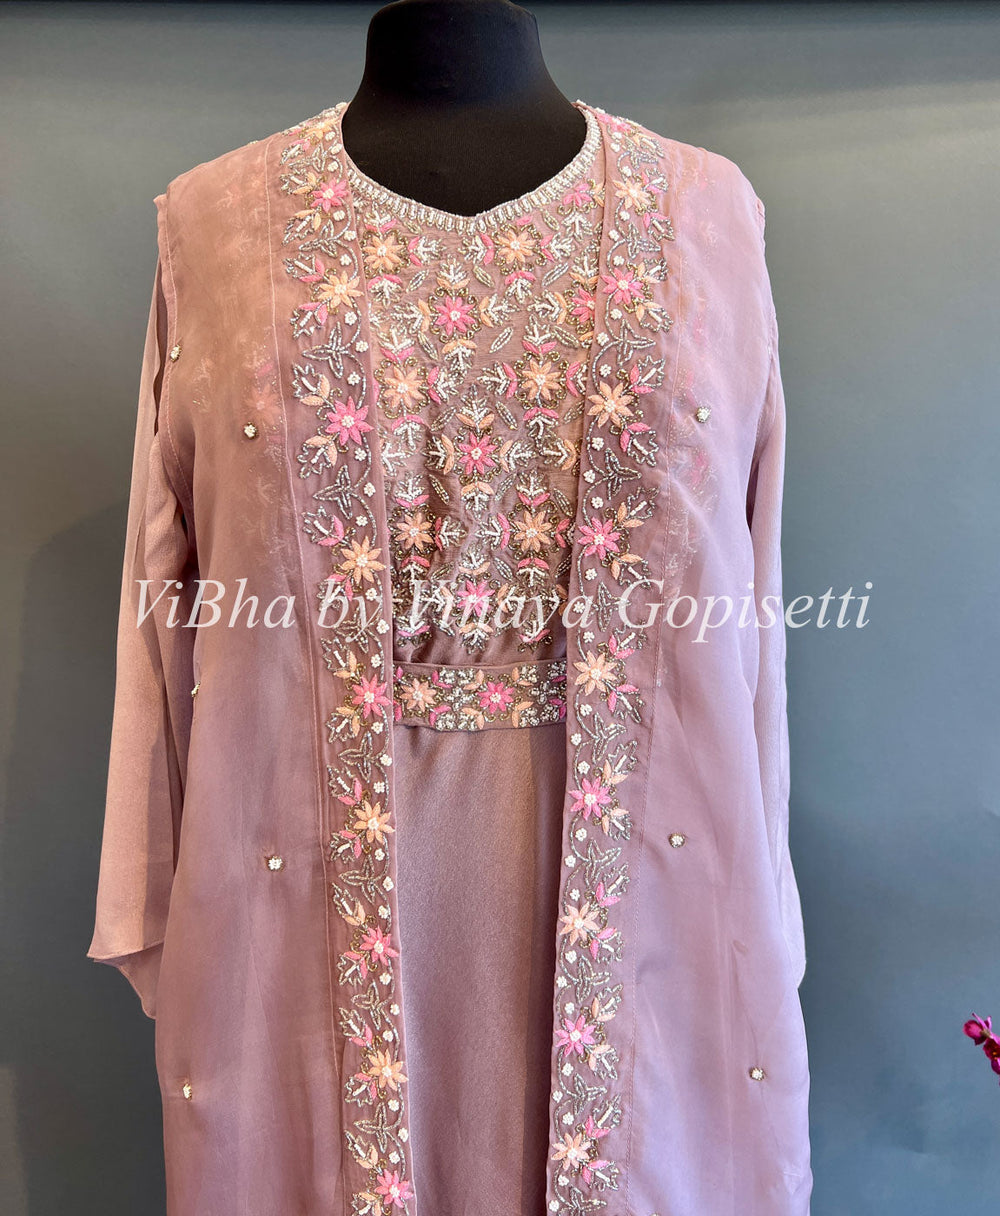 Designer Suits - Pastel Mauve Embroidered Floor Length Gown With Detachable Jacket And Belt